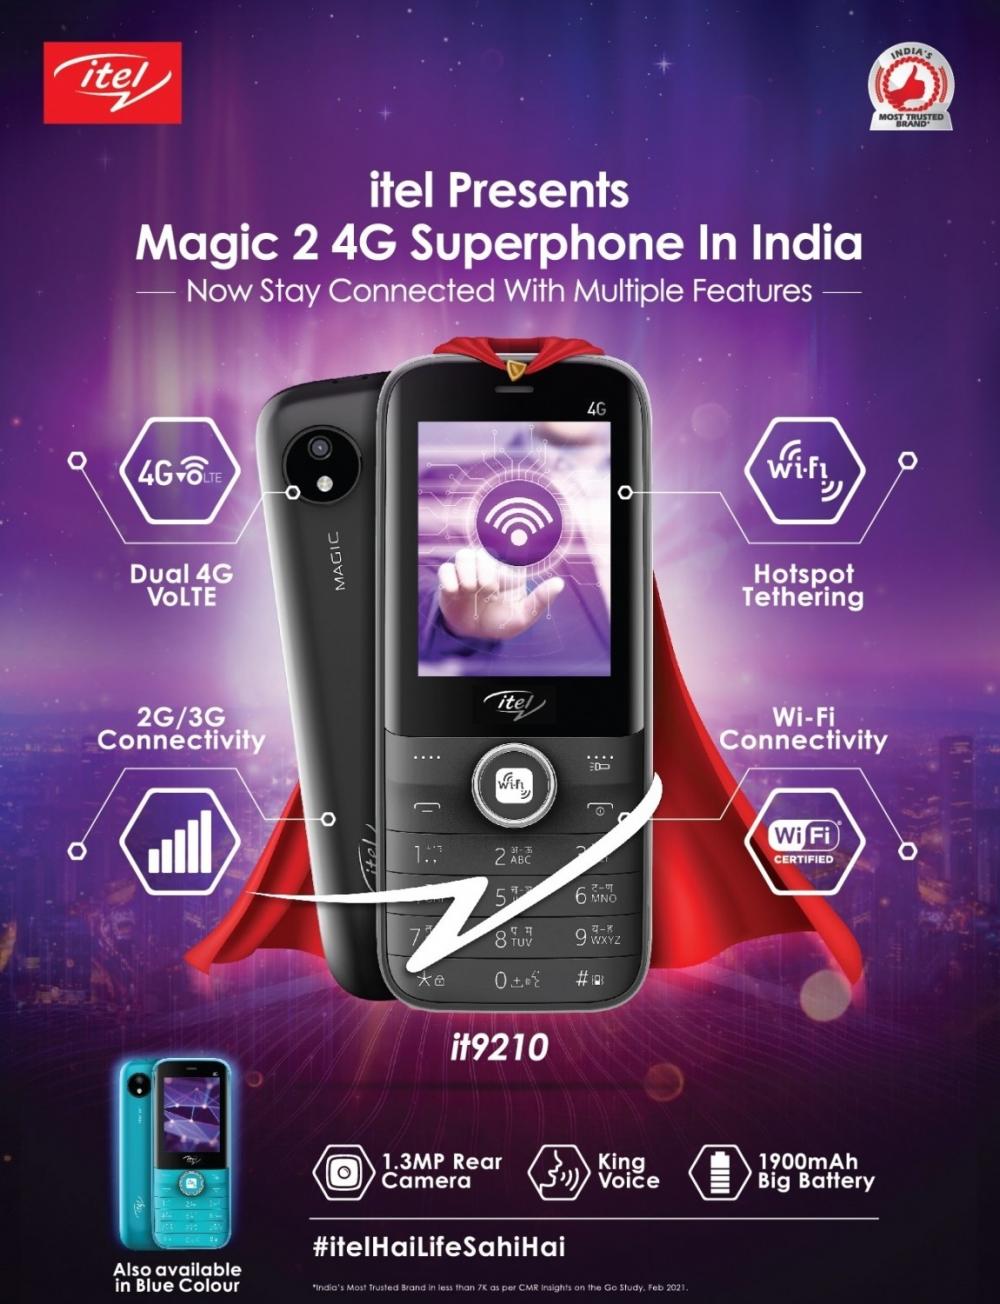 The Weekend Leader - itel launches 'Magic 2' 4G superphone with Wi-Fi tethering in India